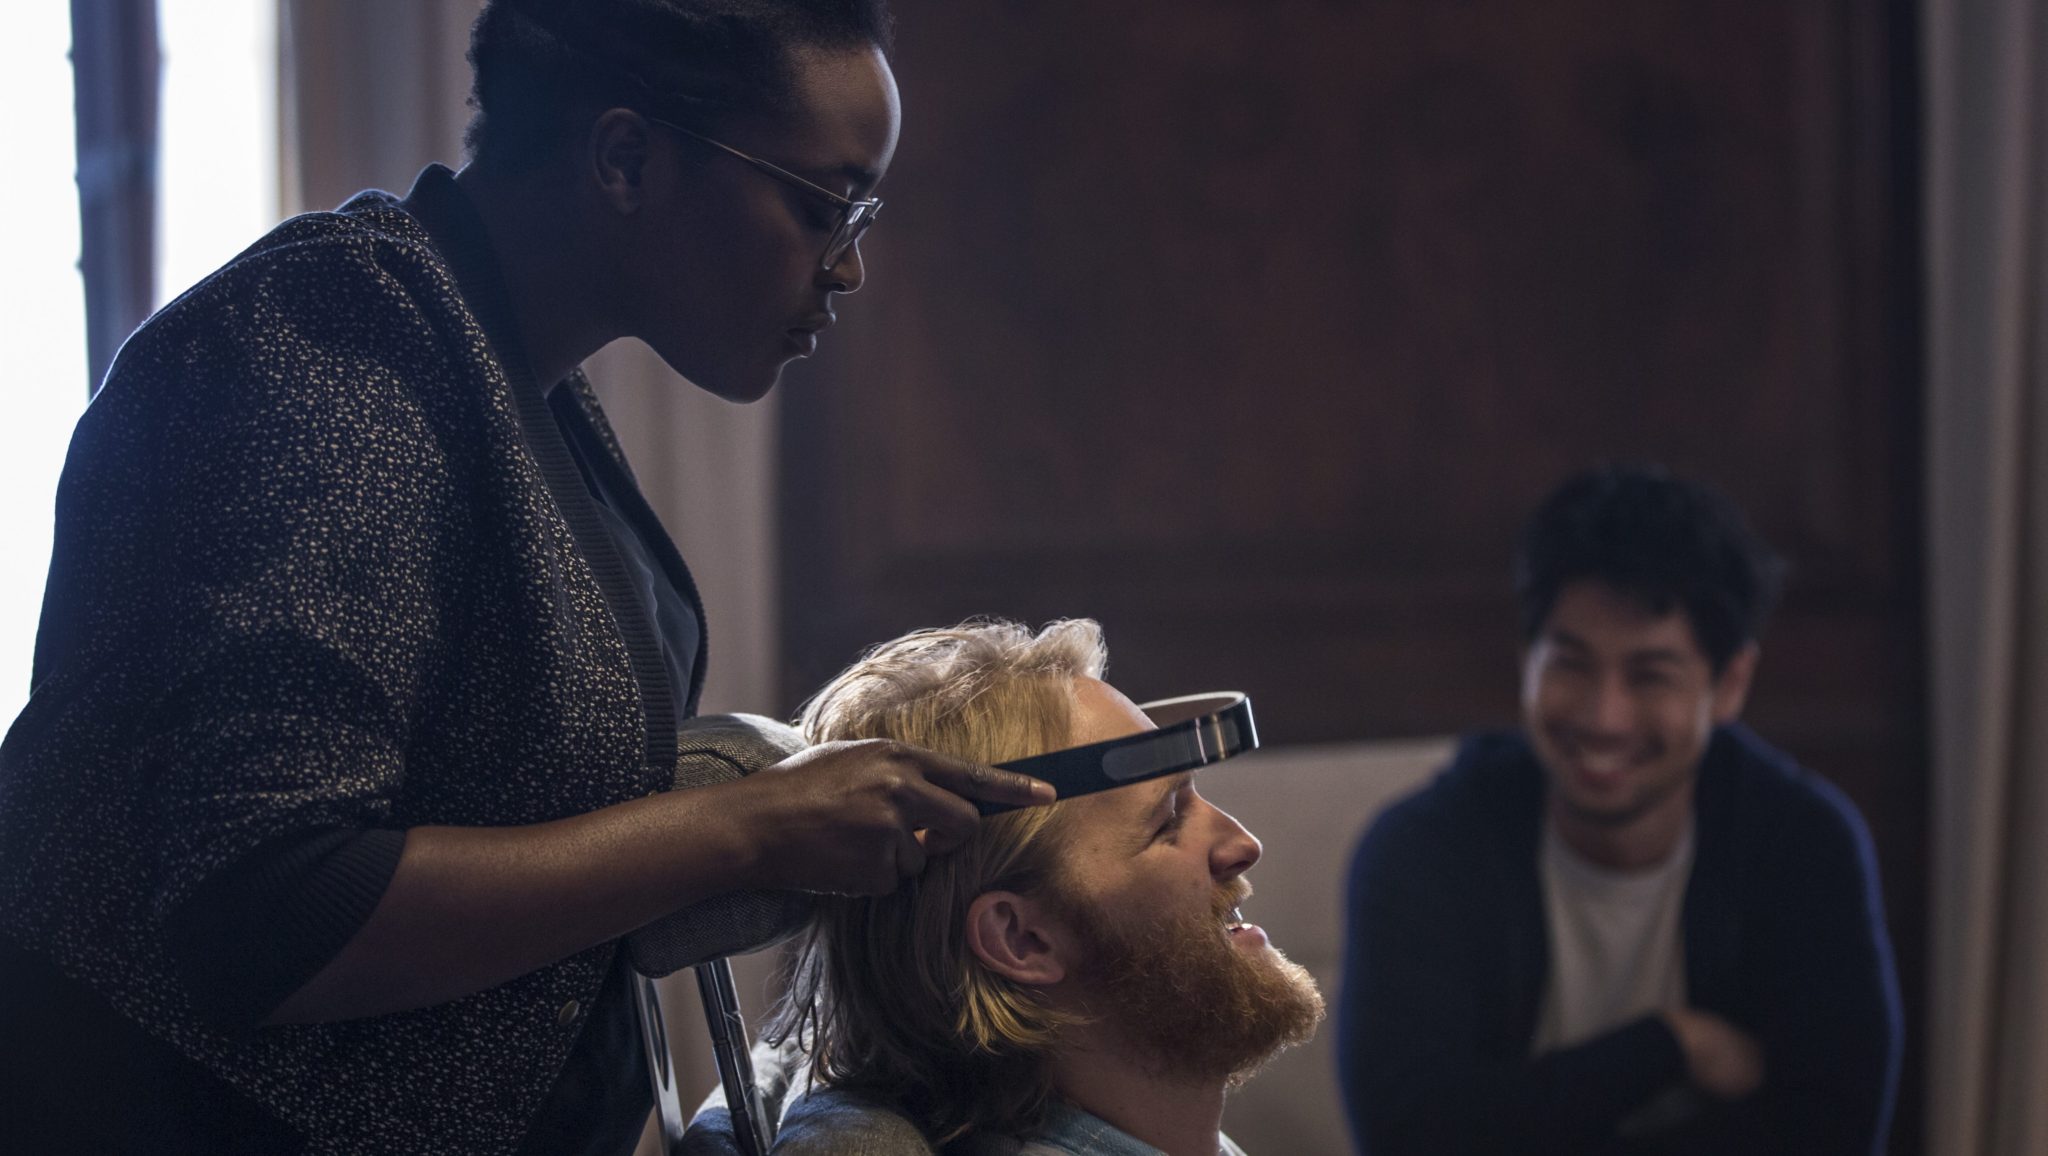 Black Mirror: Series 3 Episode 2 - Playtest review - Film and TV Now